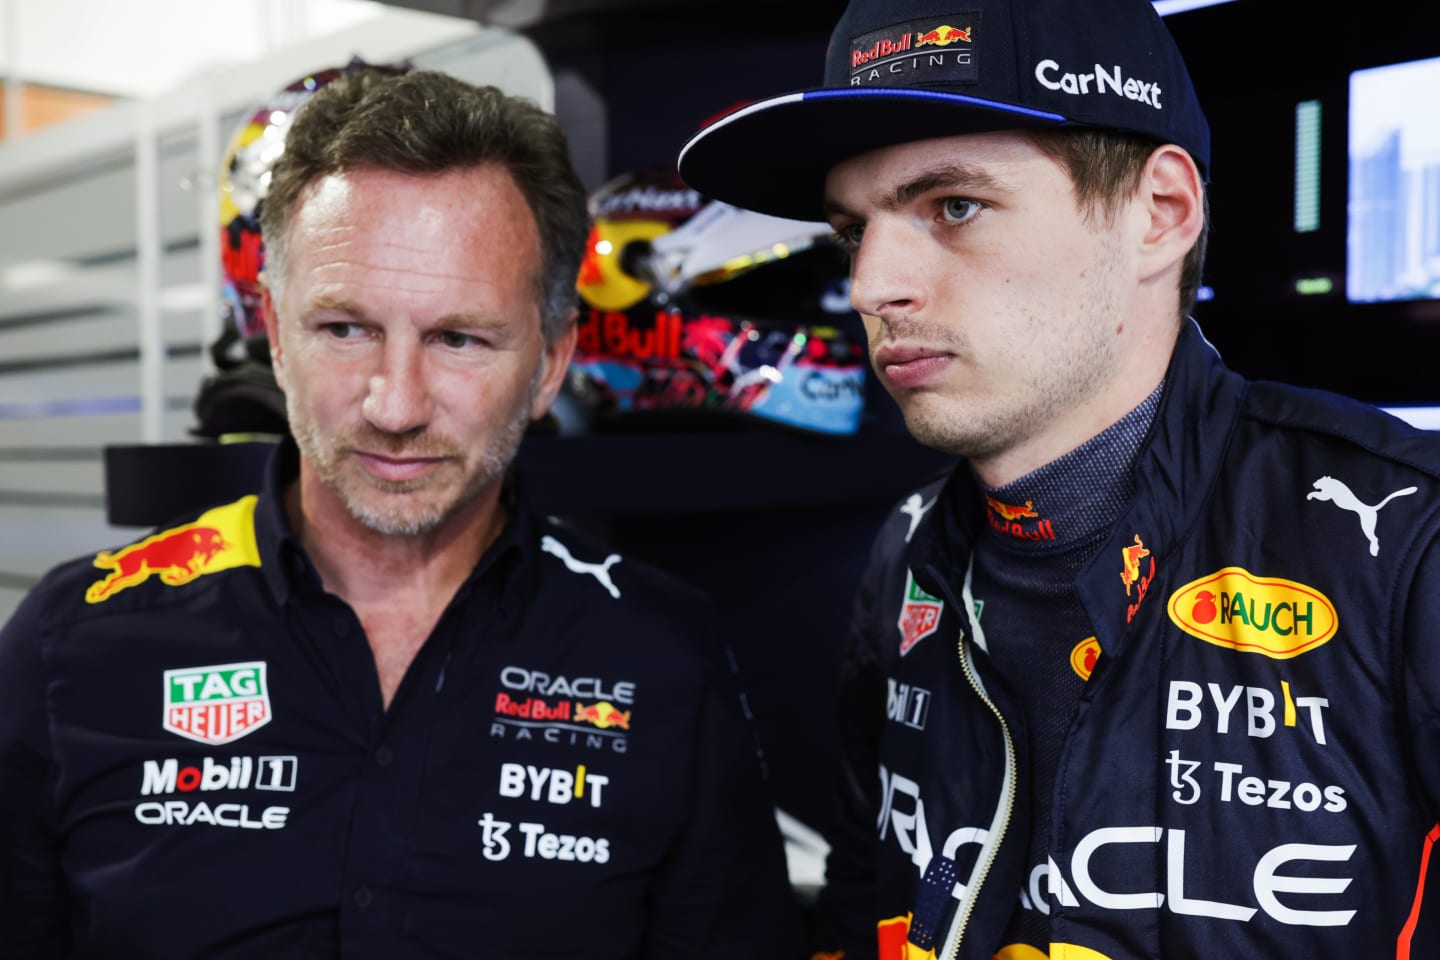 MIAMI, FLORIDA - MAY 07: Max Verstappen of the Netherlands and Oracle Red Bull Racing talks with Red Bull Racing Team Principal Christian Horner in the garage during qualifying ahead of the F1 Grand Prix of Miami at the Miami International Autodrome on May 07, 2022 in Miami, Florida. (Photo by Mark Thompson/Getty Images)